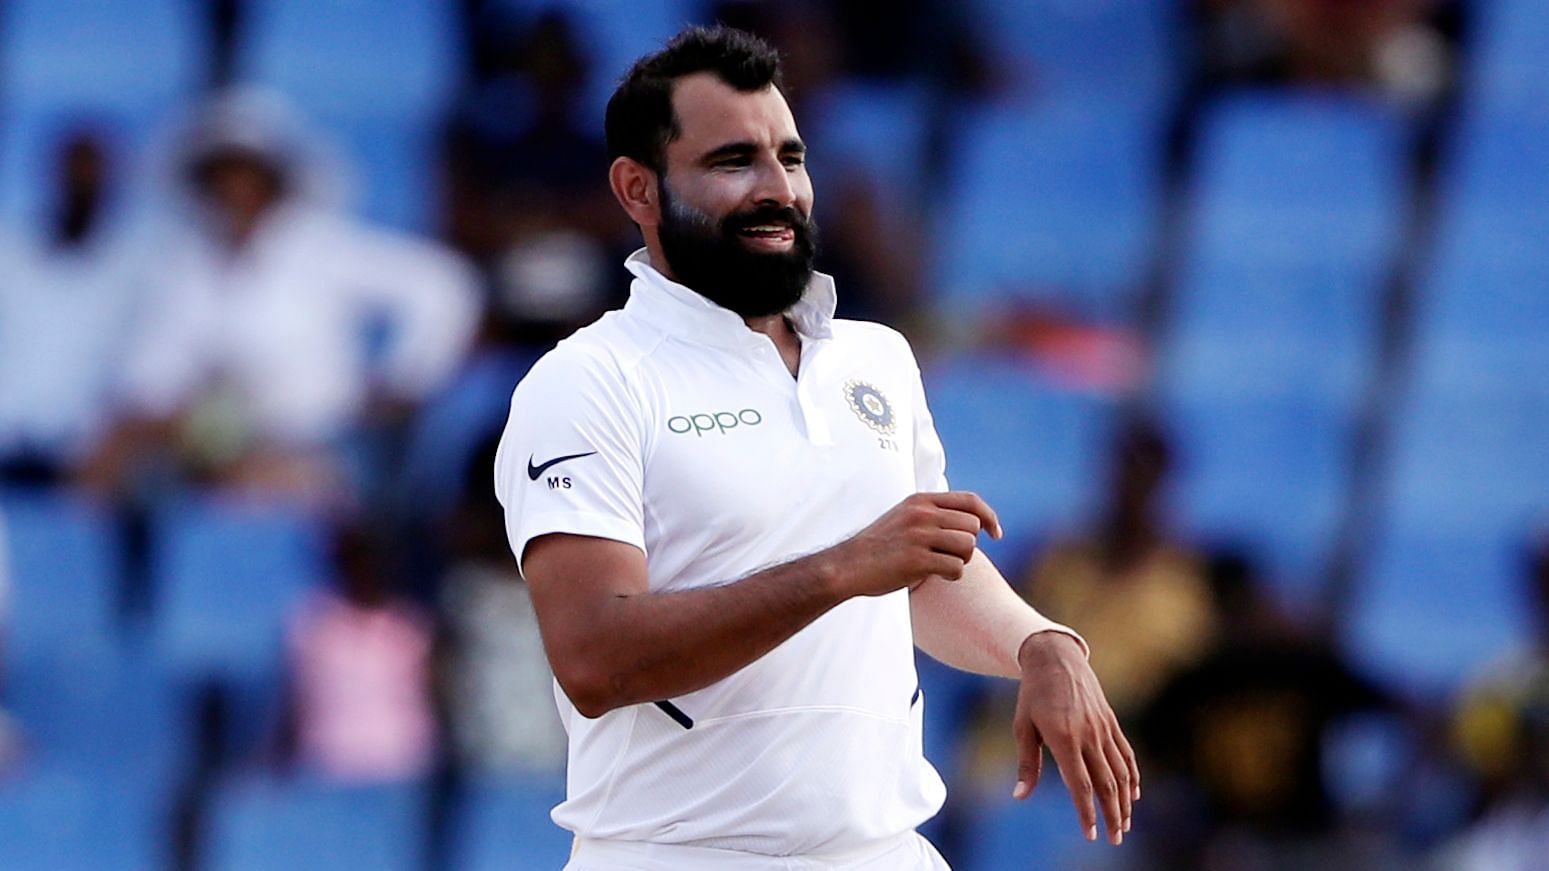 The Alipore court in Kolkata has issued an arrest warrant against Indian cricketer Mohammed Shami.